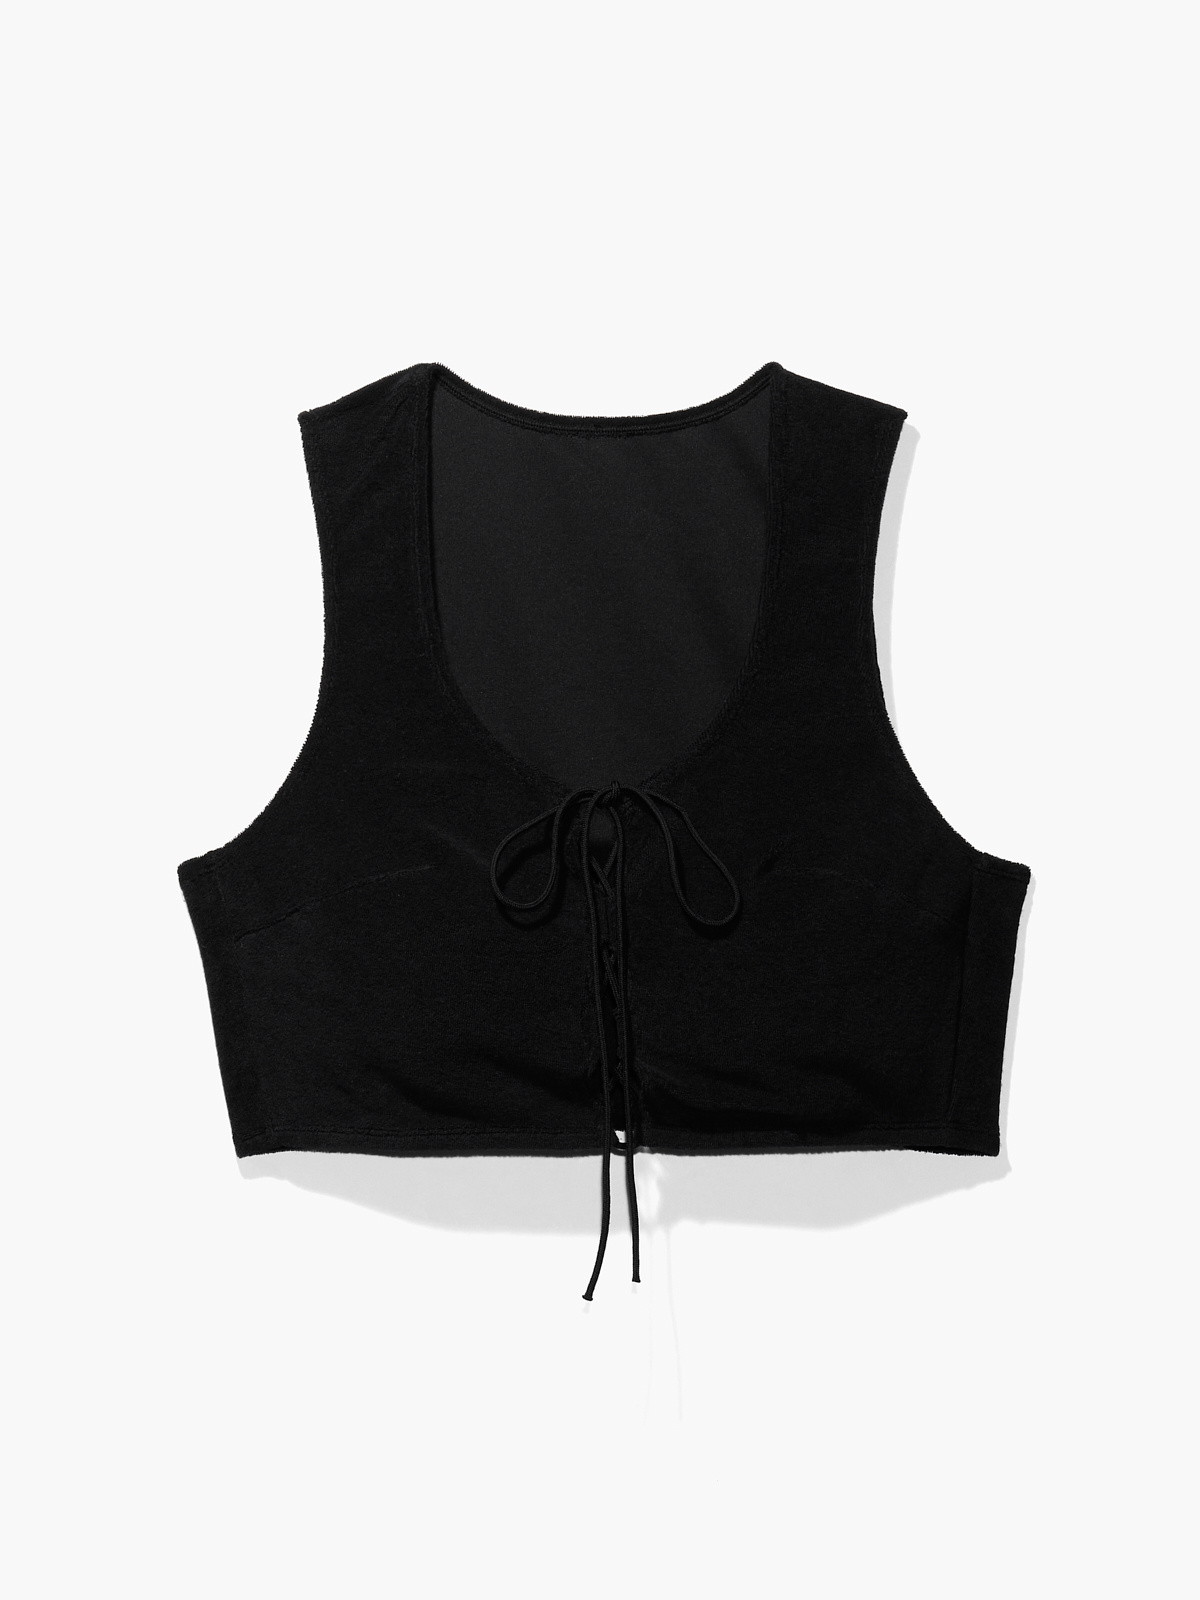 https://cdn.savagex.com/media/images/products/SQ2146943-0687/70S-TERRY-SLEEVELESS-CROP-TOP-WITH-TIE-FRONT-SQ2146943-0687-LAYDOWN-1200x1600.jpg